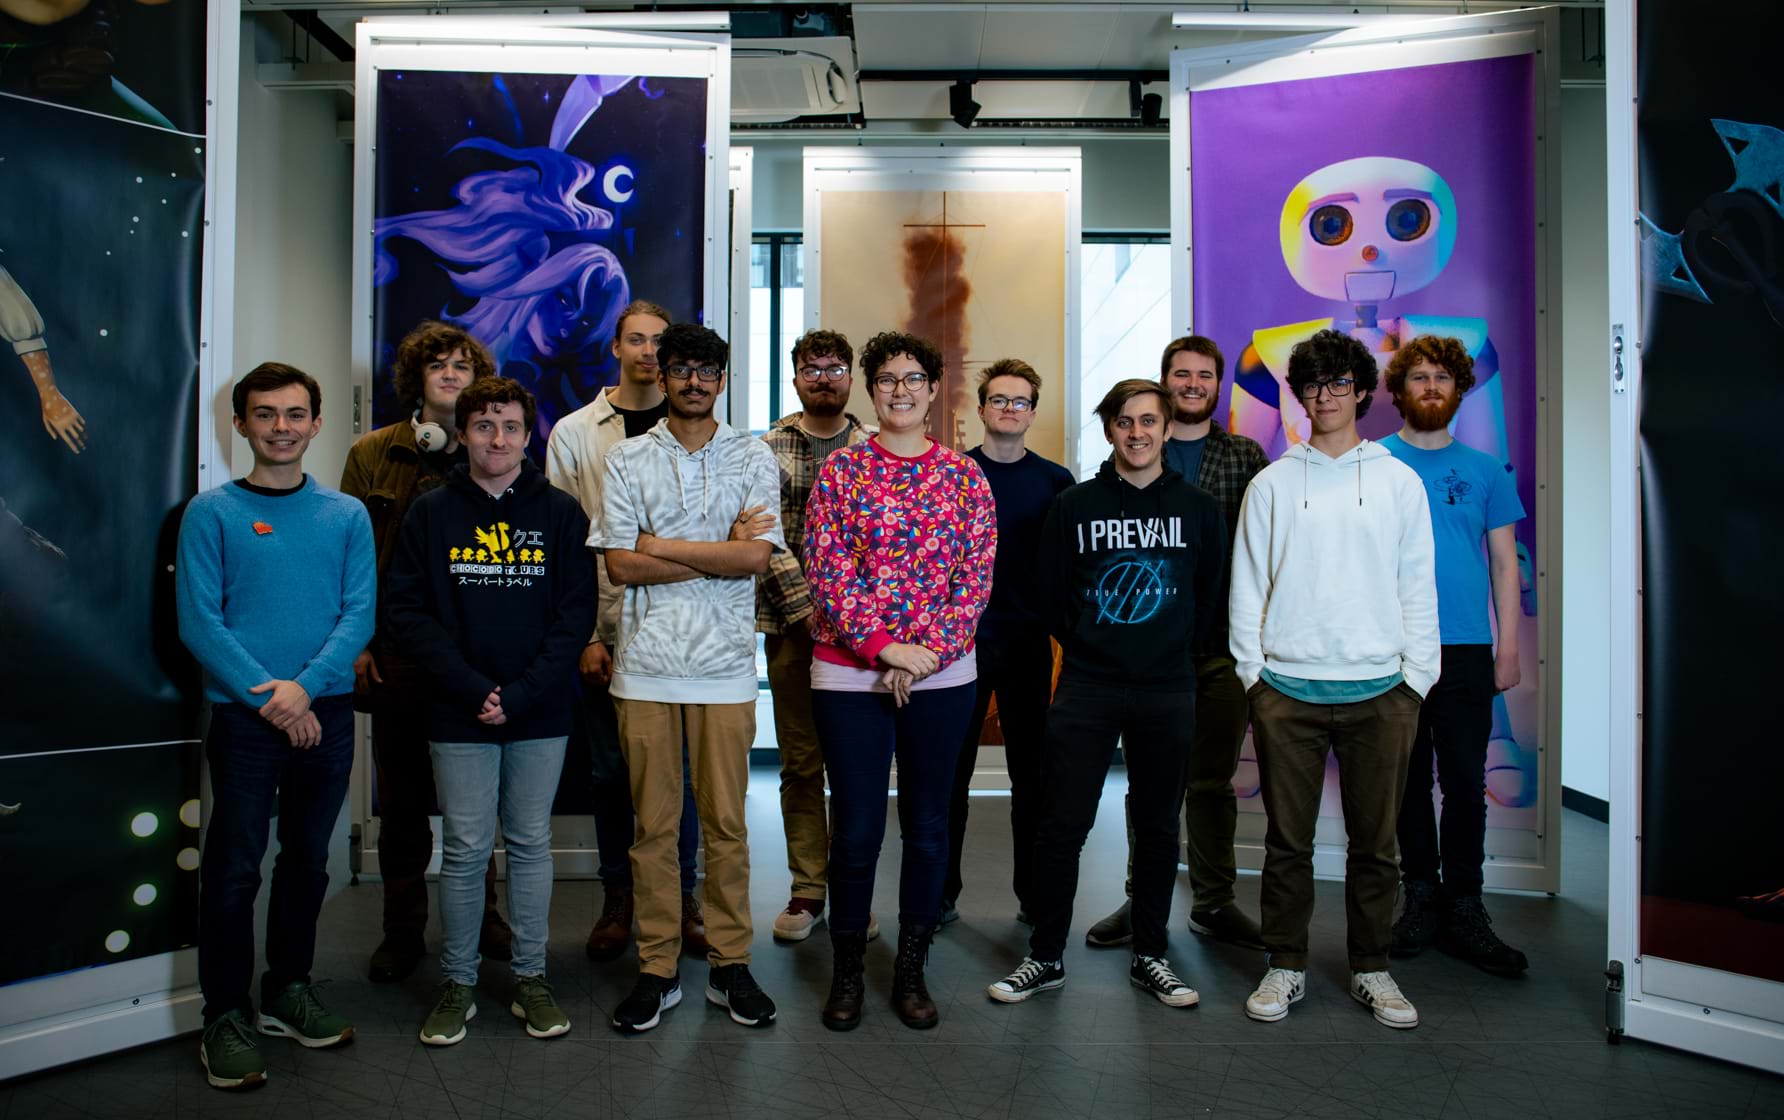 Abertay students from the two winning teams with Games and Arts lecturer Dr Hailey Austin